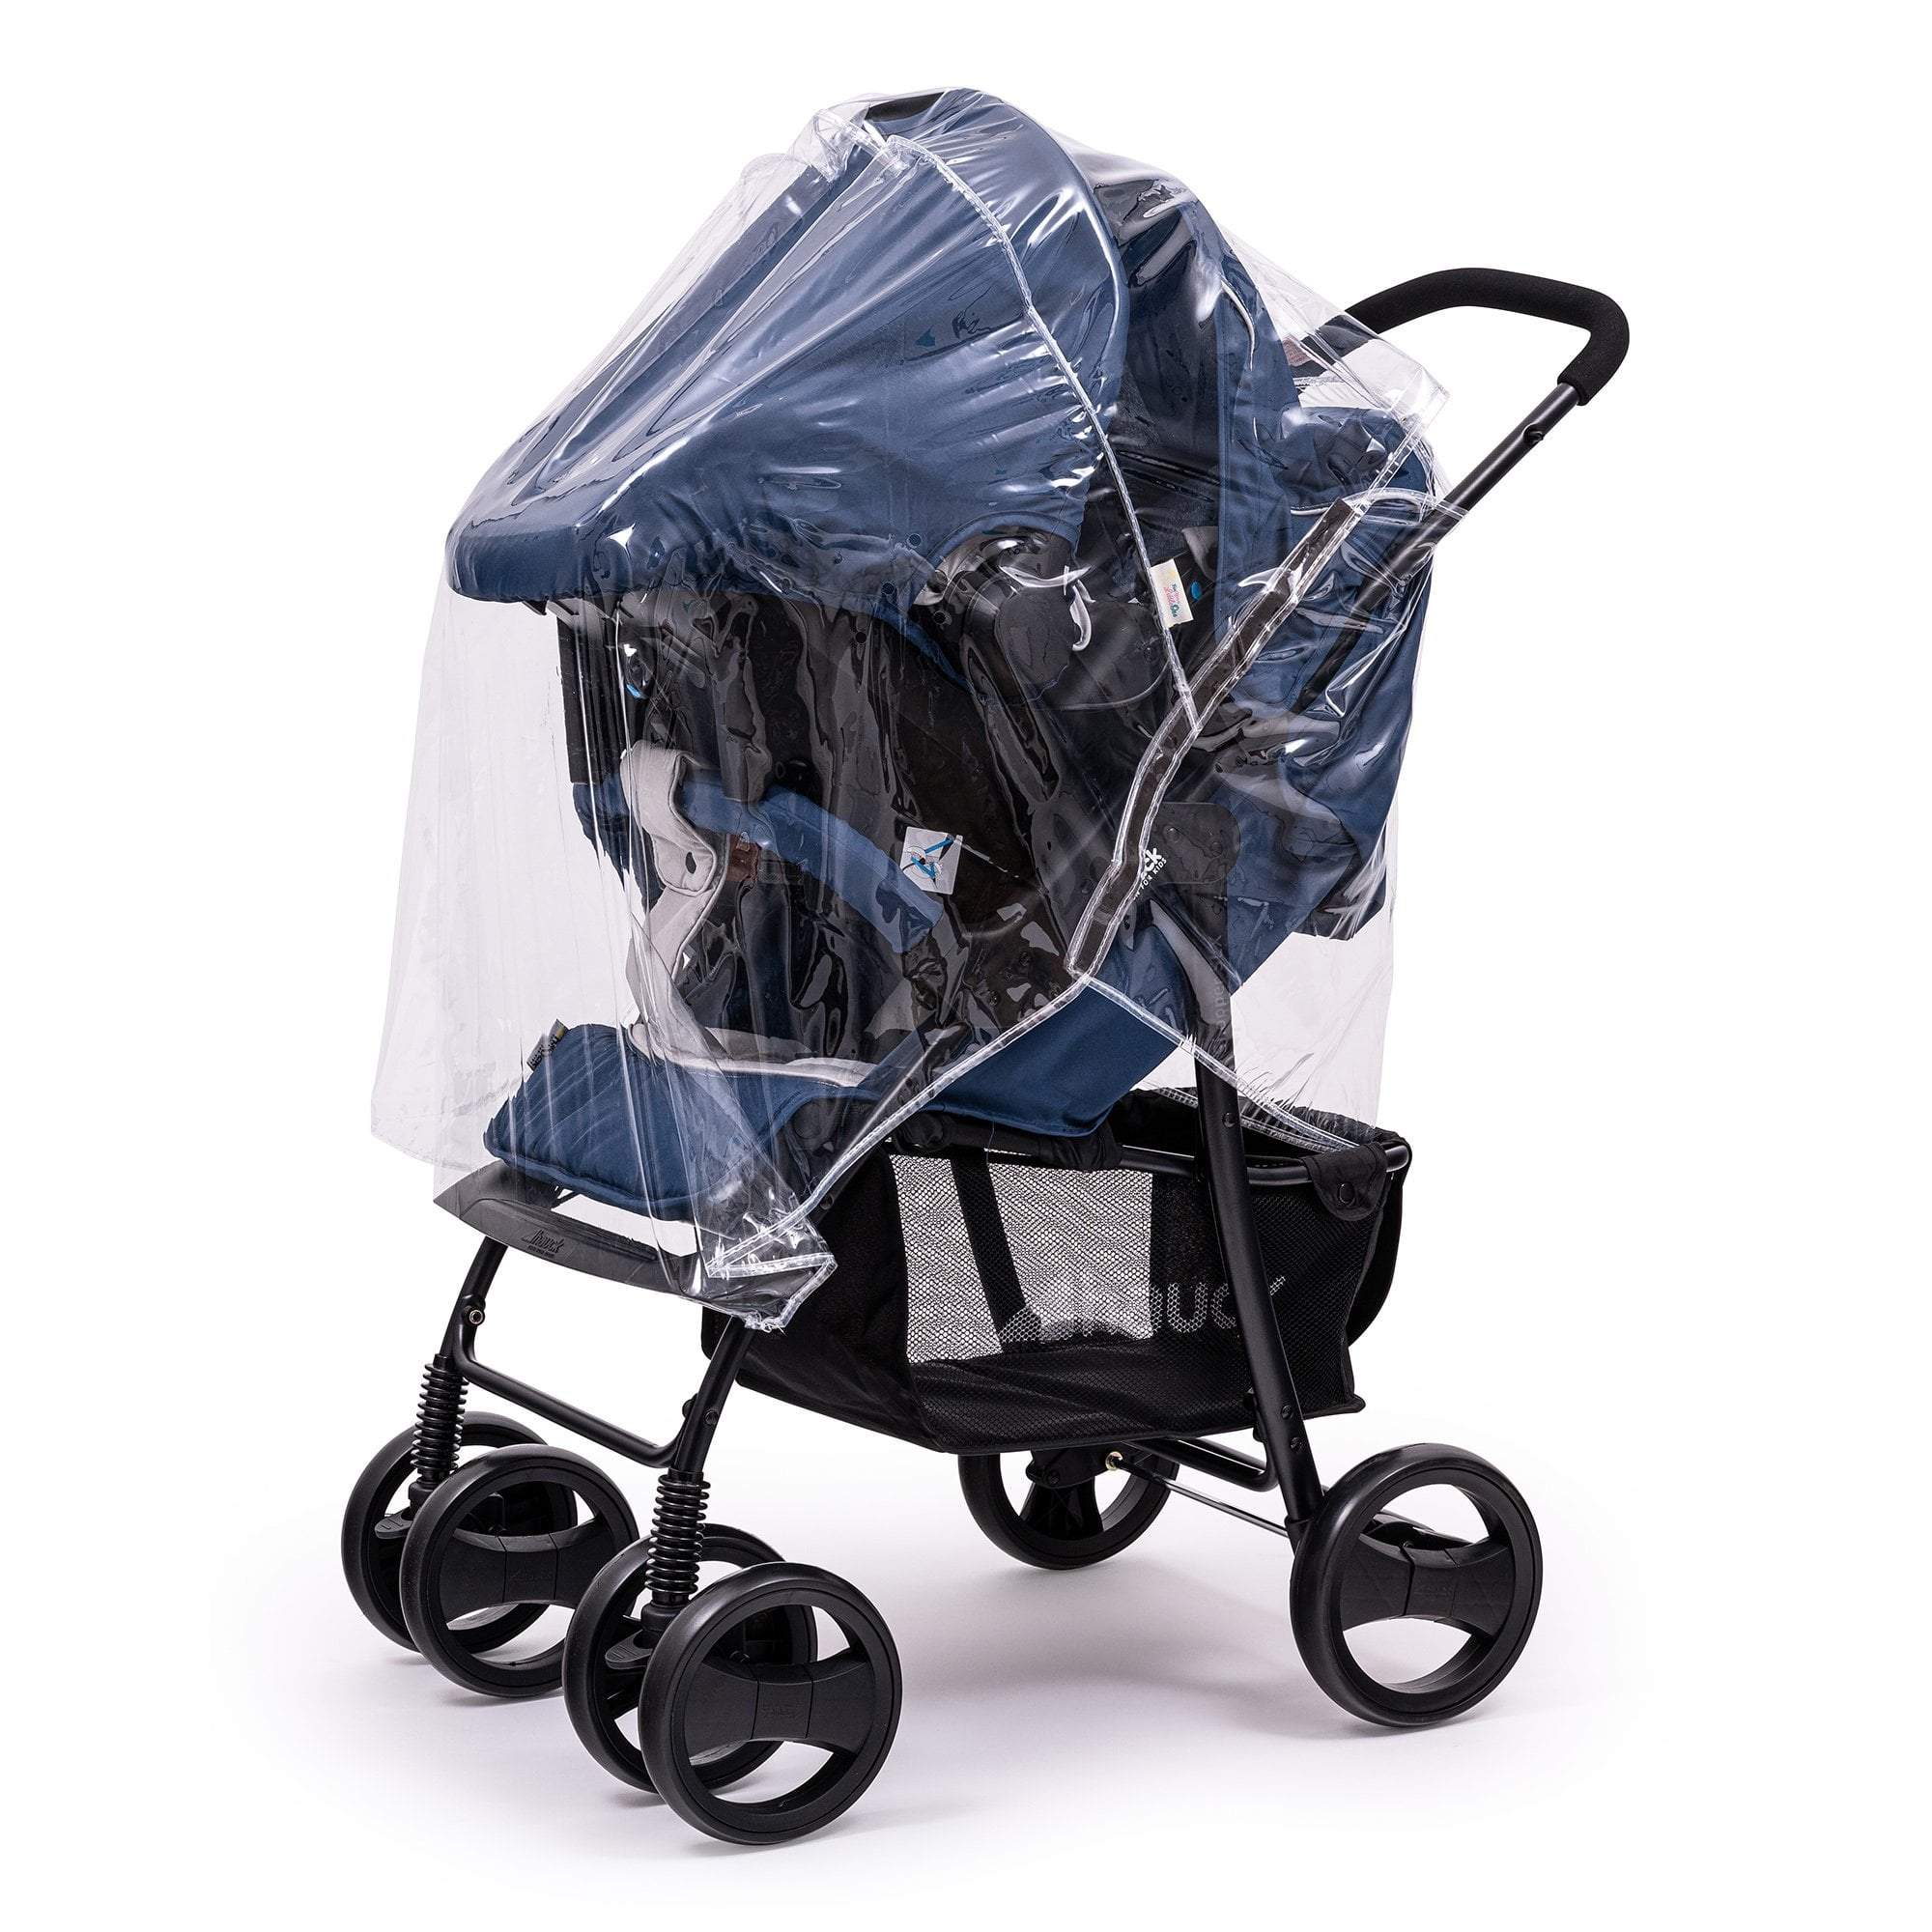 Travel System Raincover Compatible with BabyDan - Fits All Models -  | For Your Little One